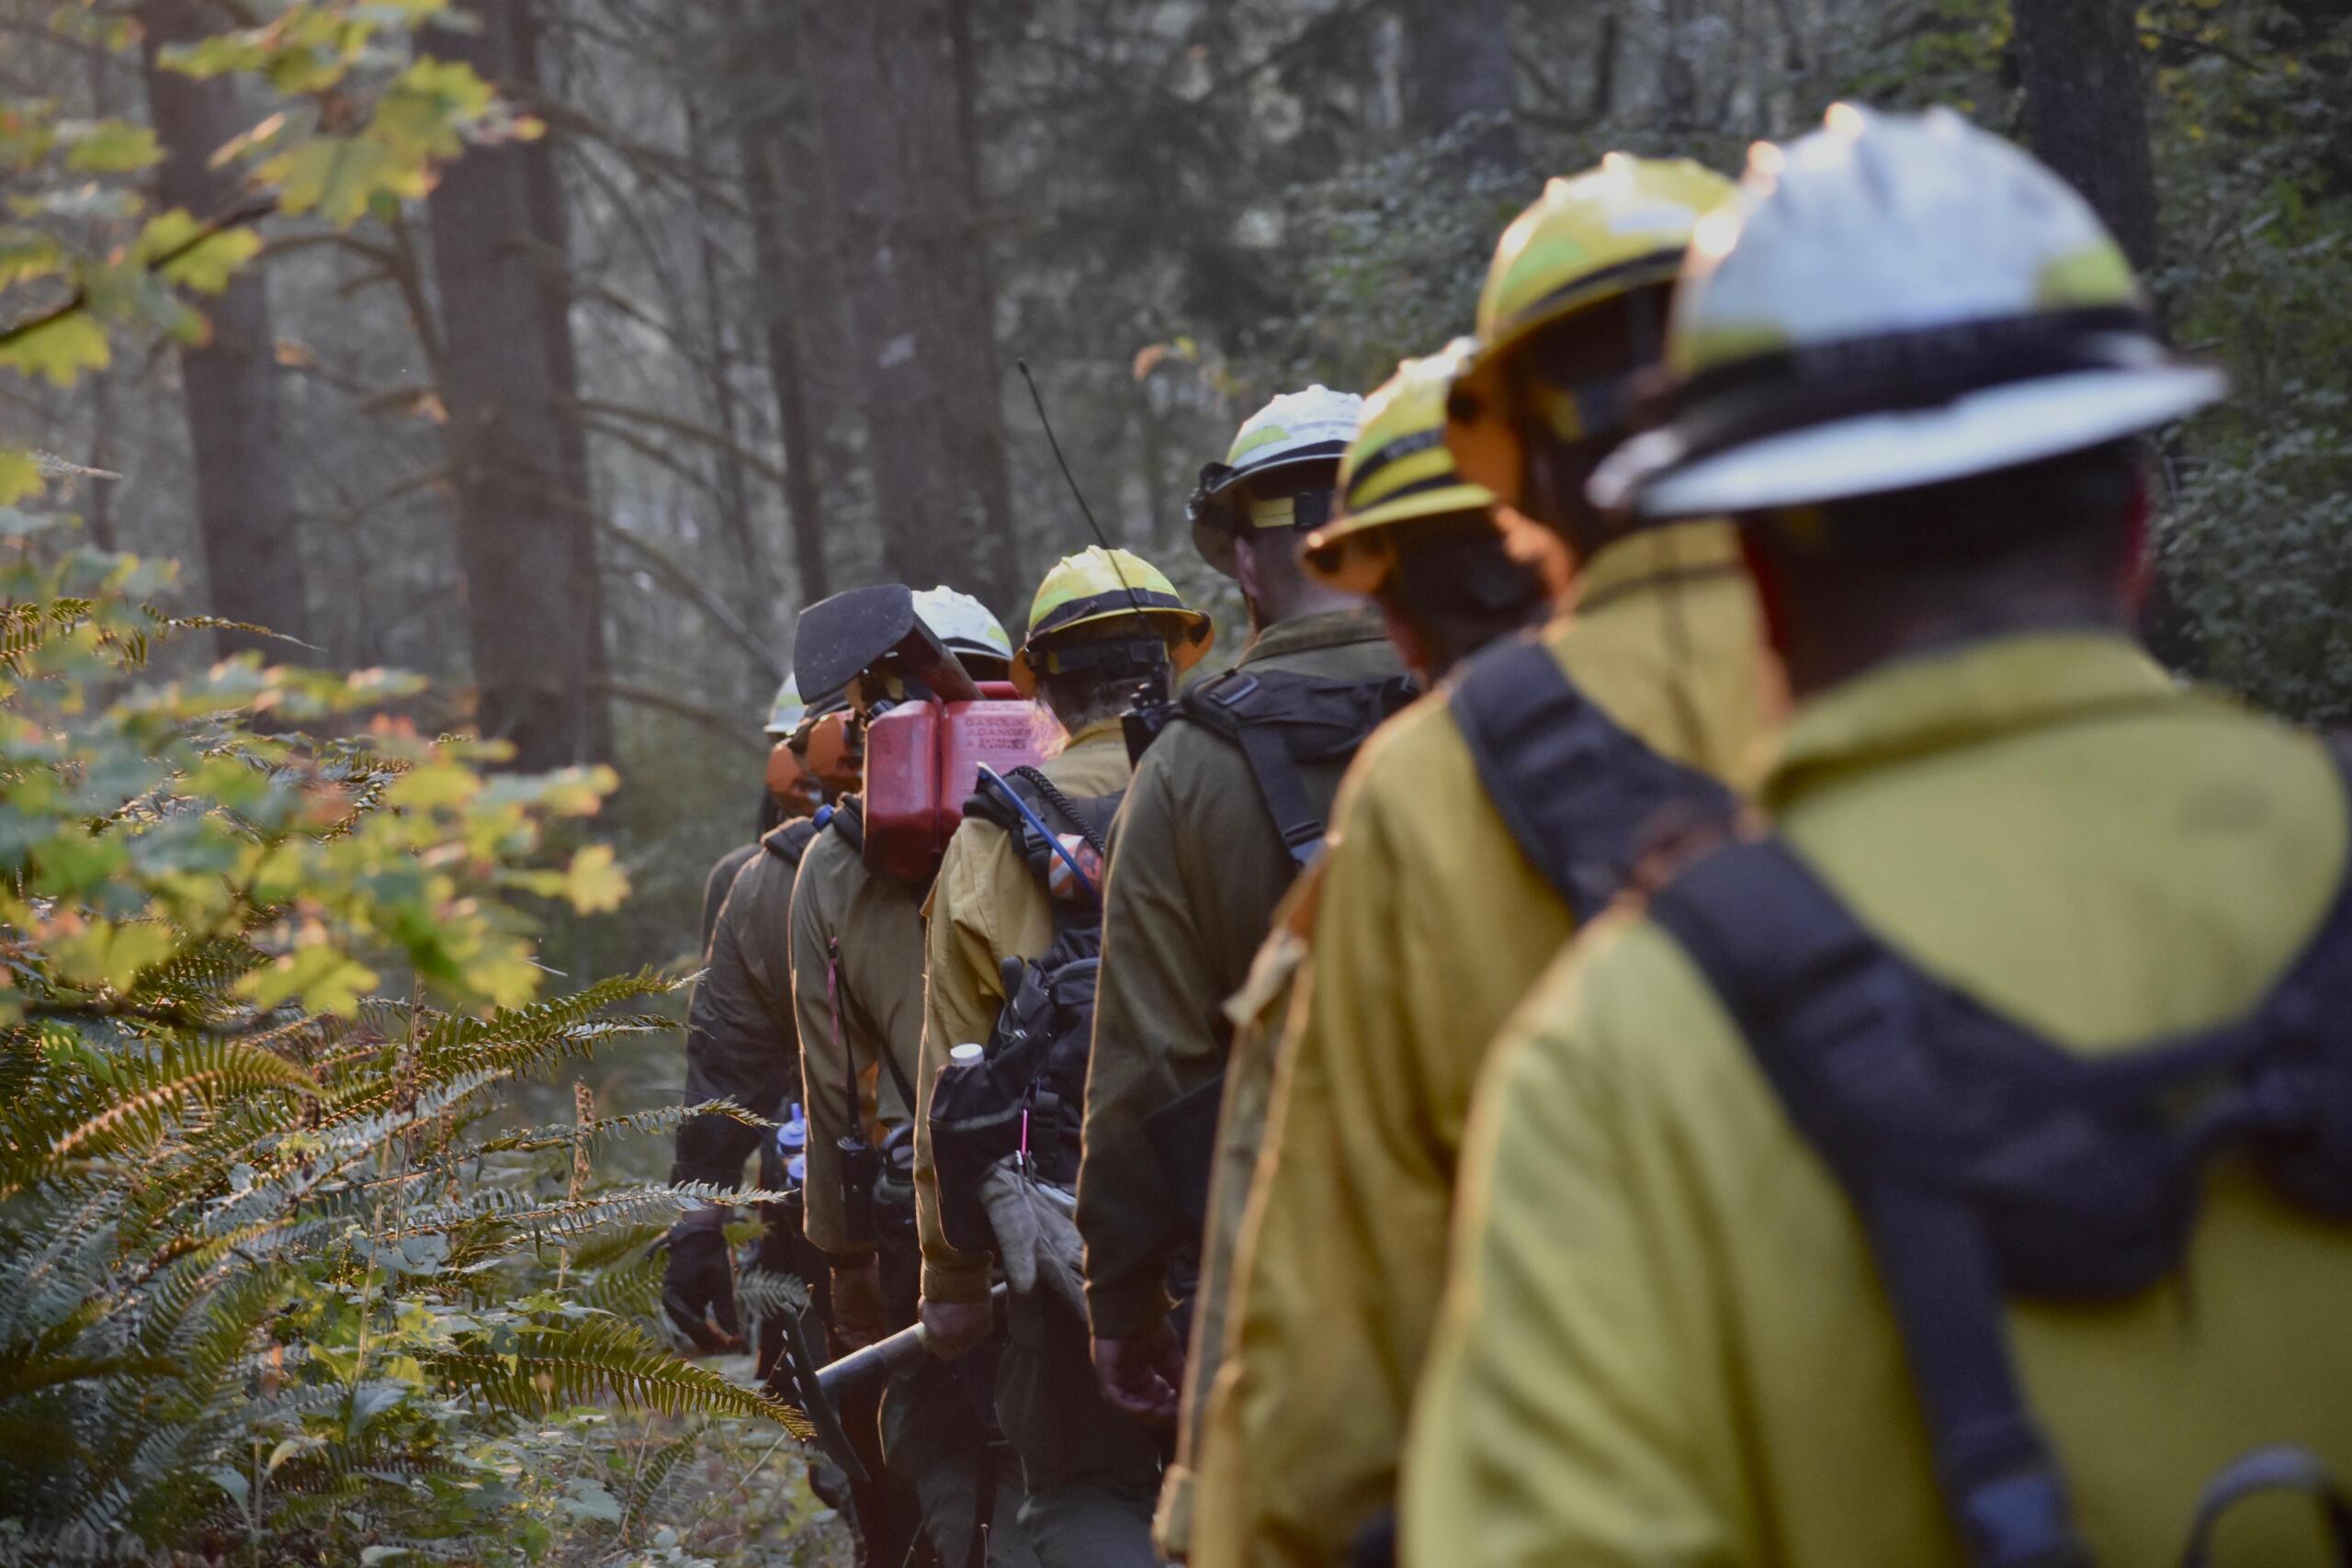 A crew fighting the Nakia Creek Fire in east Clark County walks single file through the forest near Larch Mountain.